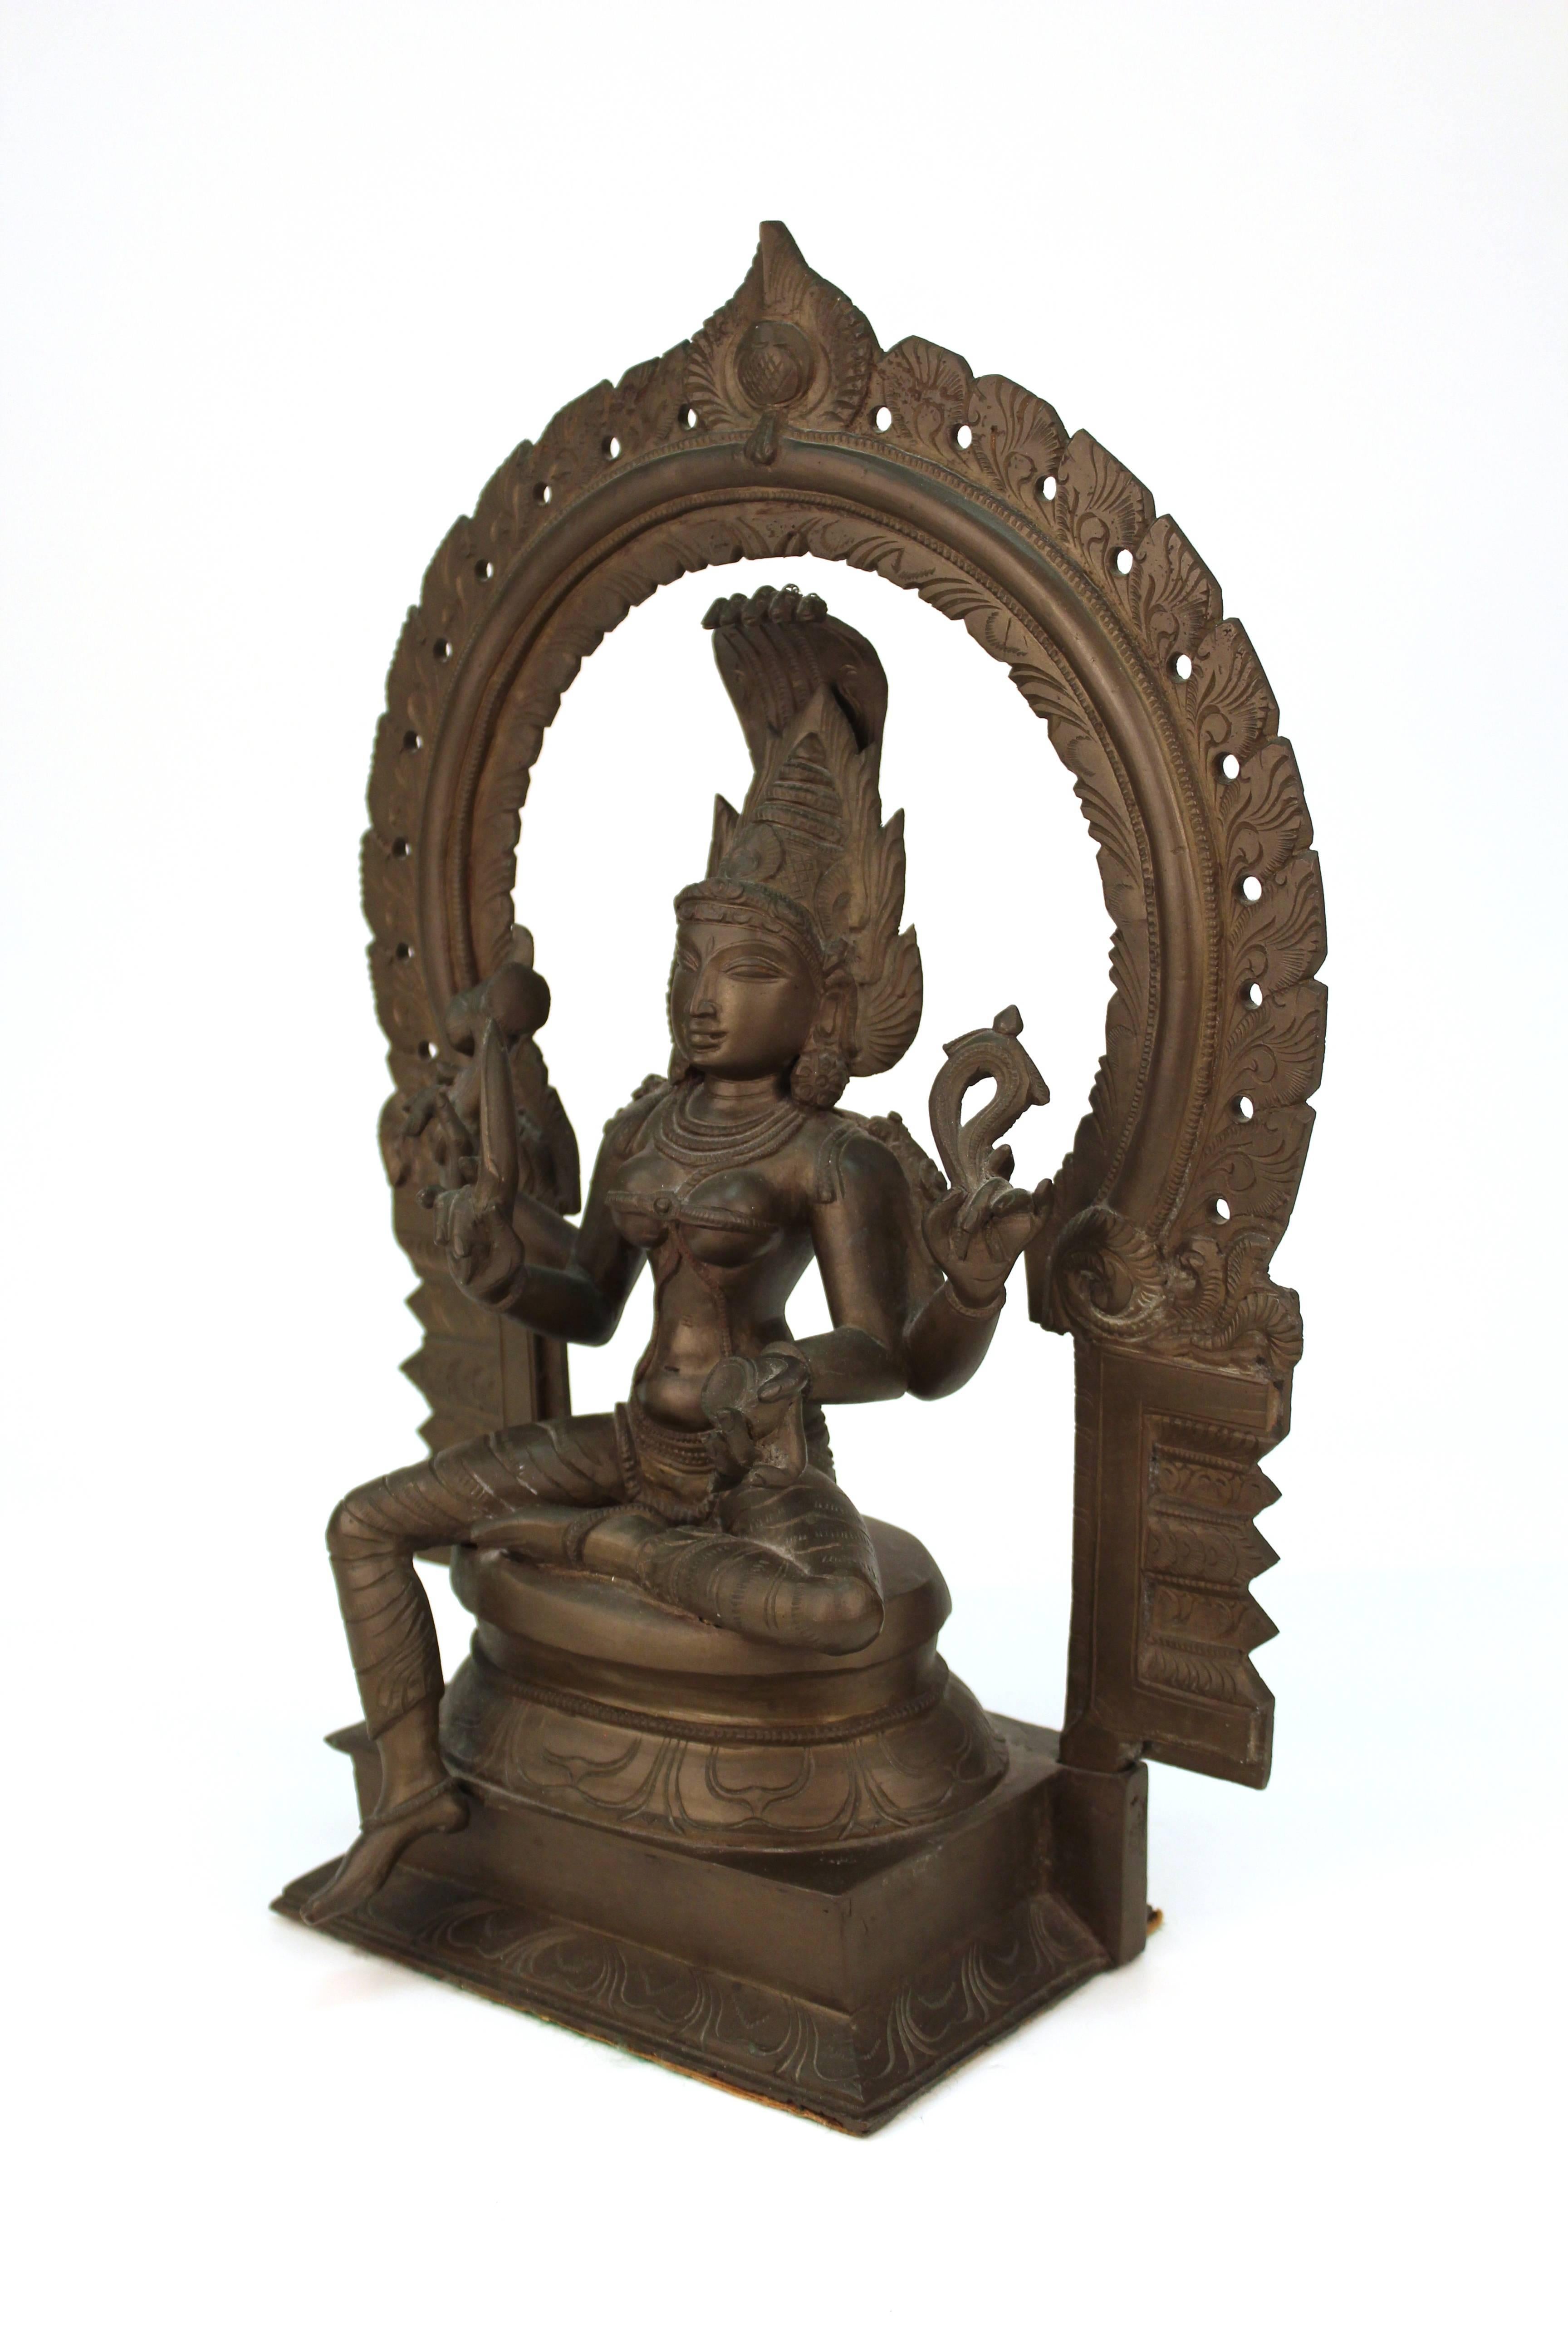 Bronze statue of Kali, the Hindu goddess of time, creation, power and destruction, seated on a lotus throne and holding various symbolic attributes. The piece is in great vintage condition.